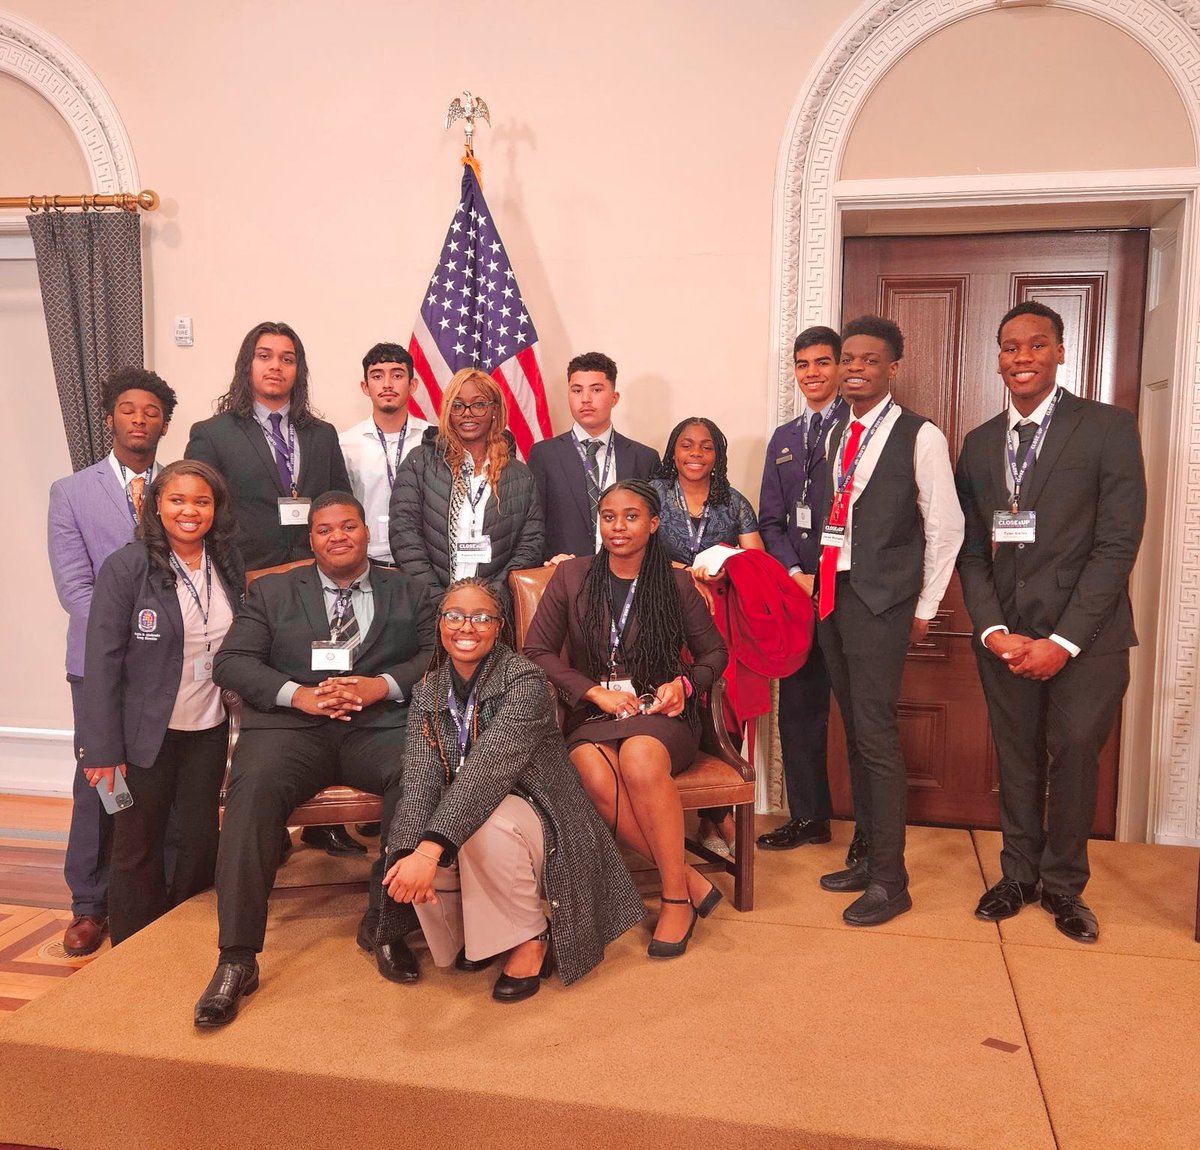 The Close Up Fondation & A Starting Point (ASP), invited students from Wise HS to participate in a forum on public policy with the Secretary of Energy & Deputy Secretary of Treasury along w/Chris Evans (Captain American - actor) and Mark Kassen. #PumaPride